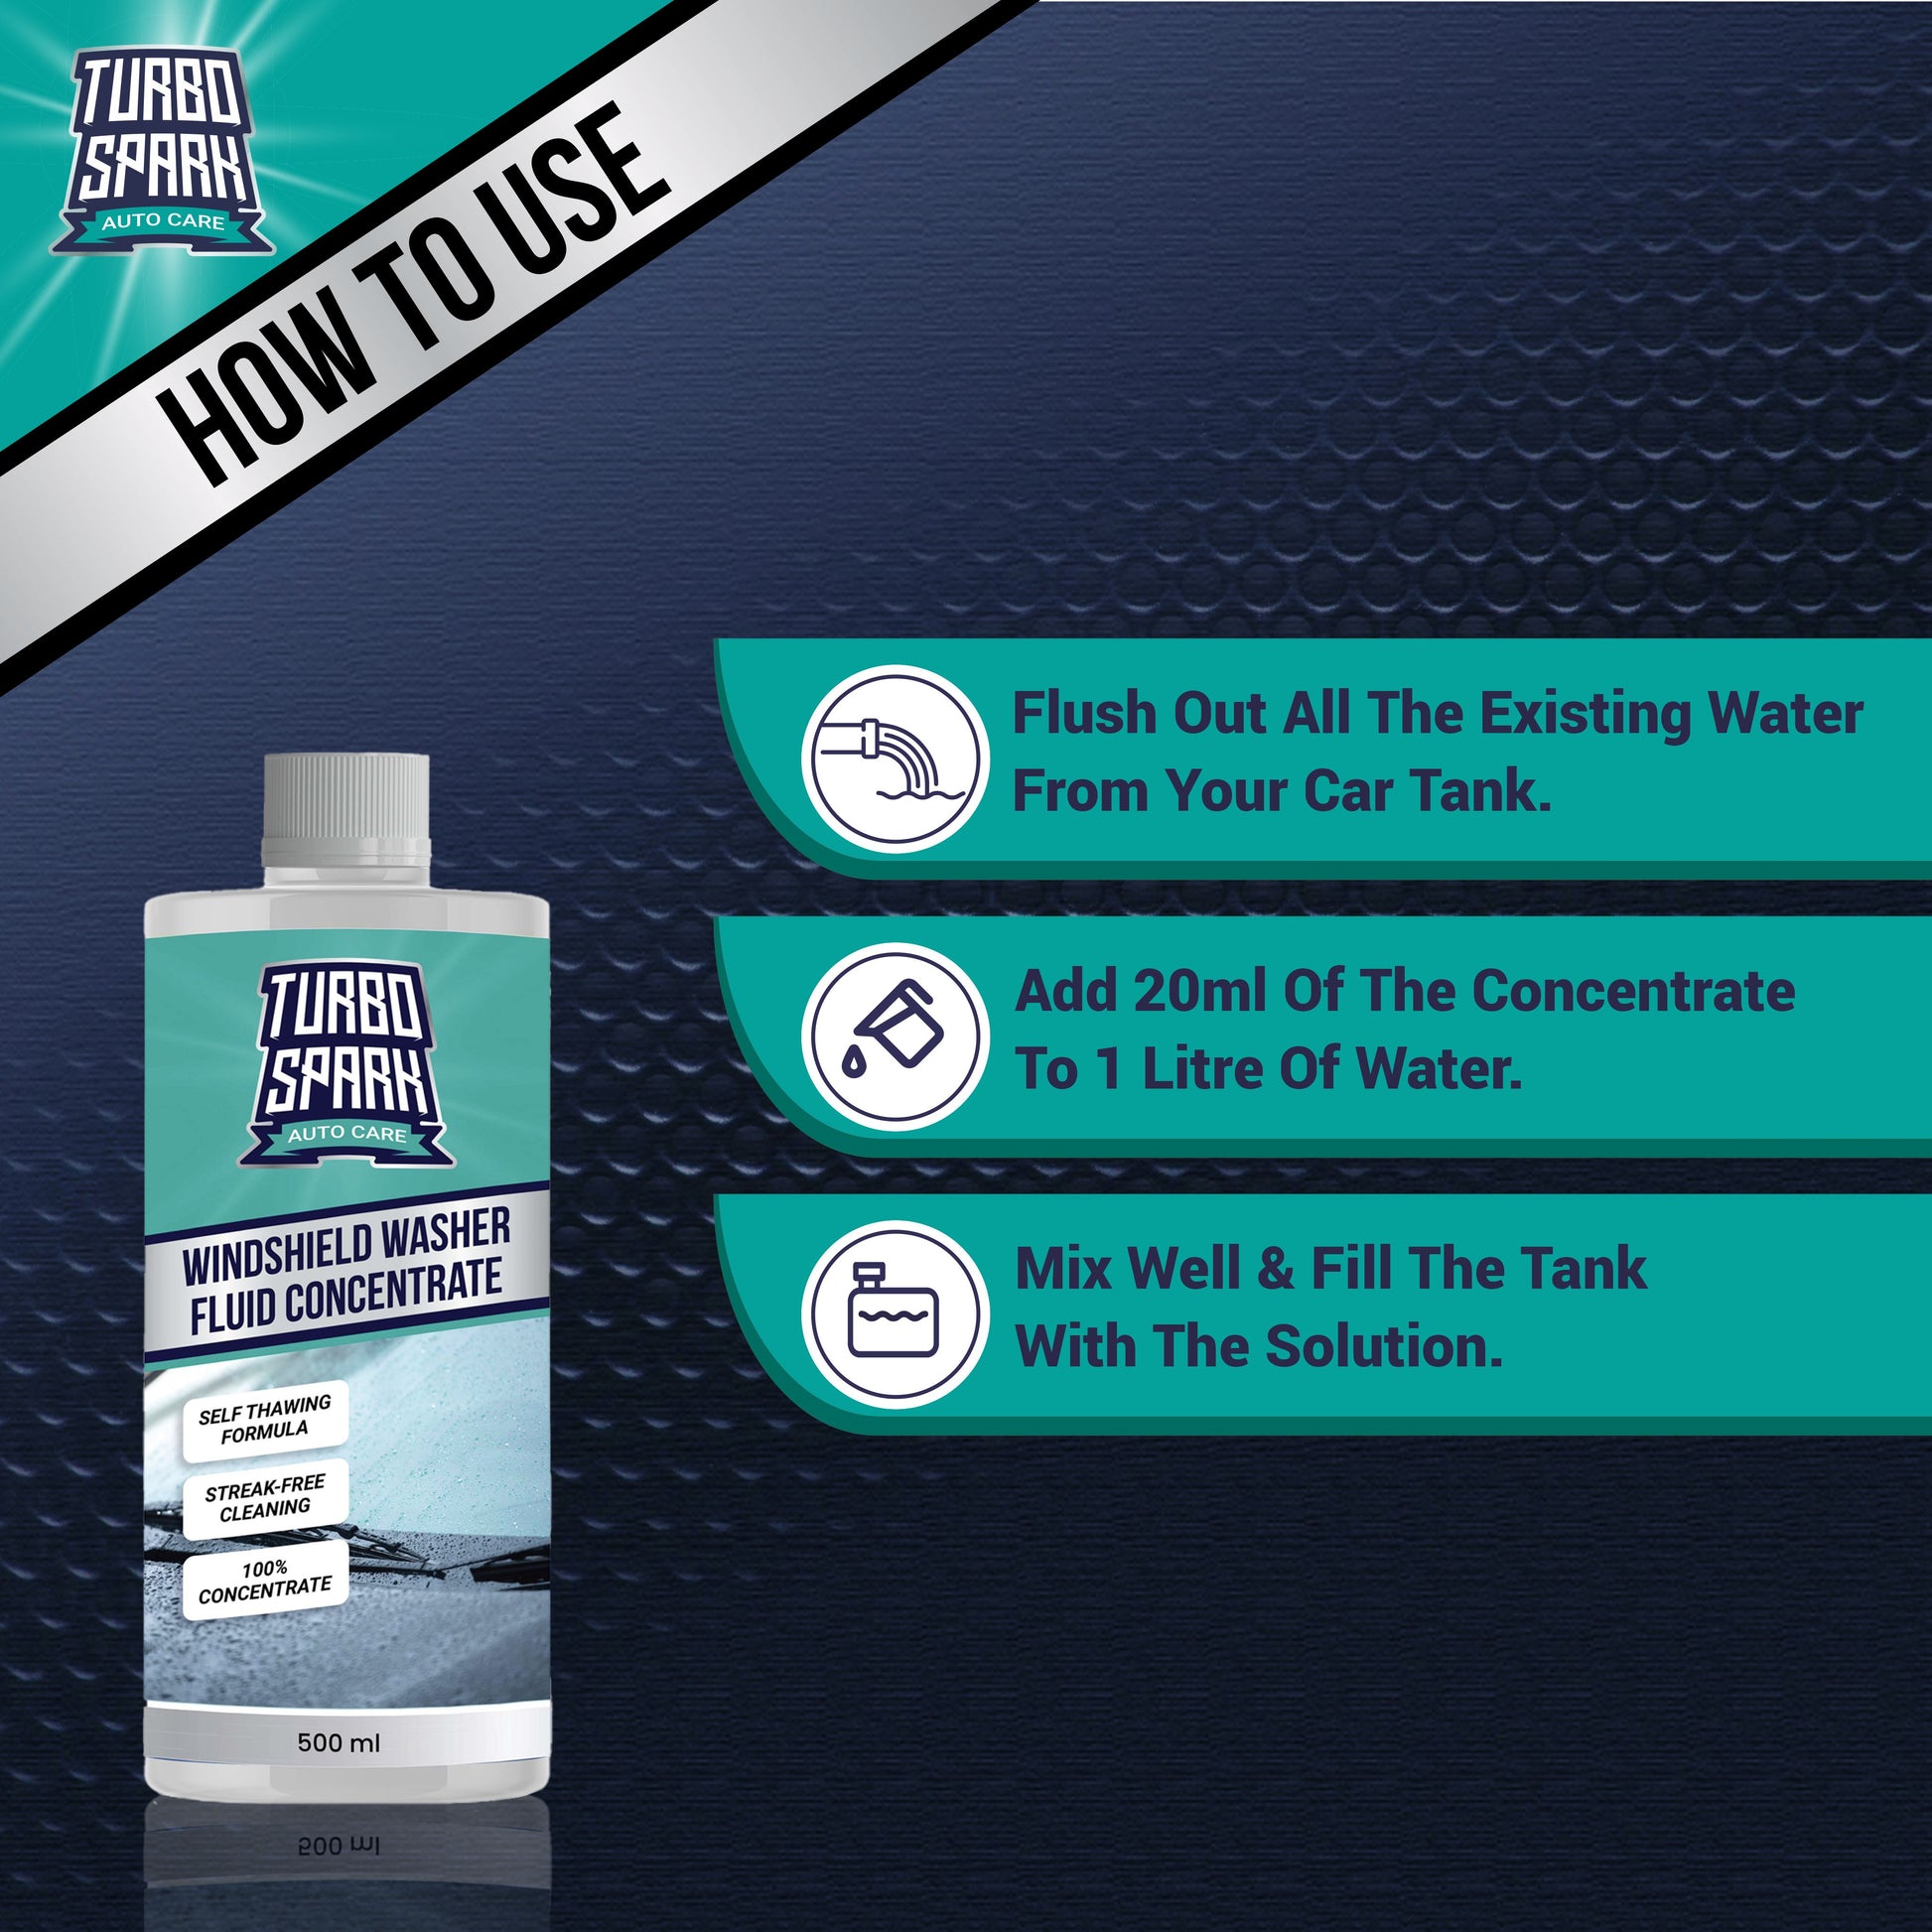 Turbo Spark Windshield Washer Fluid Concentrate 500ml at Rs 500